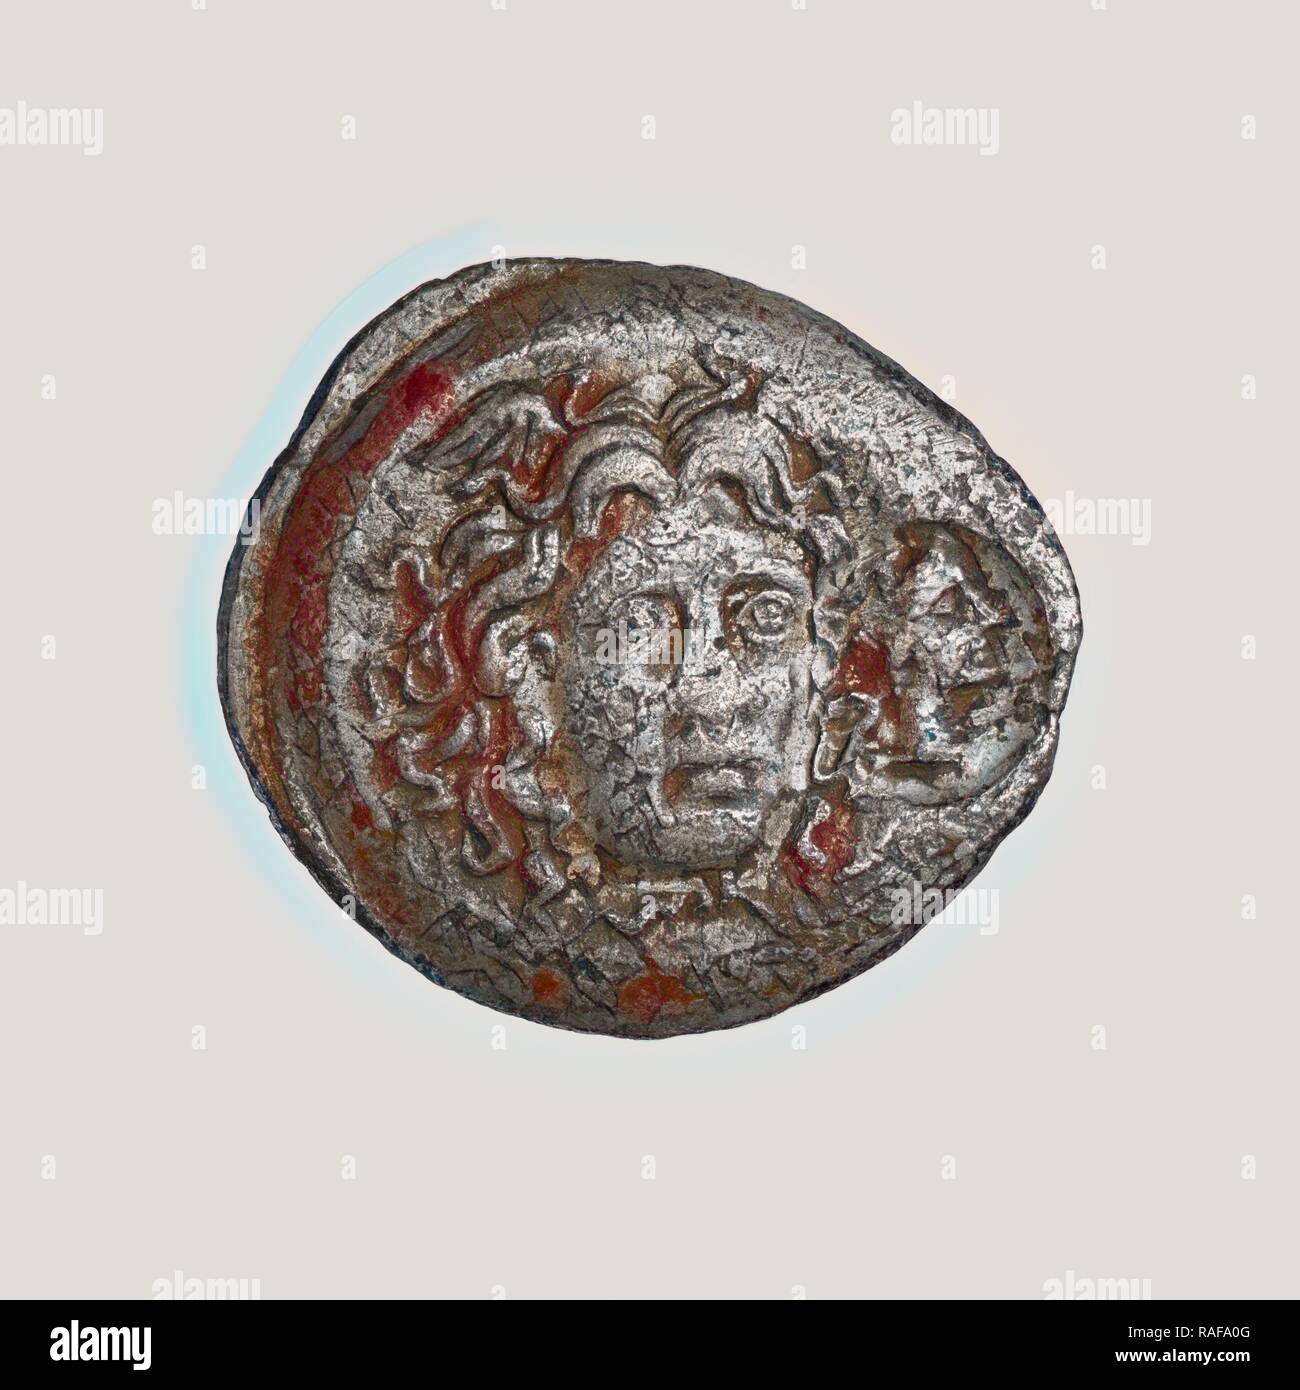 Drachm, Gortyna, Crete, 3rd century B.C, Silver, 0.0045 kg (0.0099 lb.). Reimagined by Gibon. Classic art with a reimagined Stock Photo